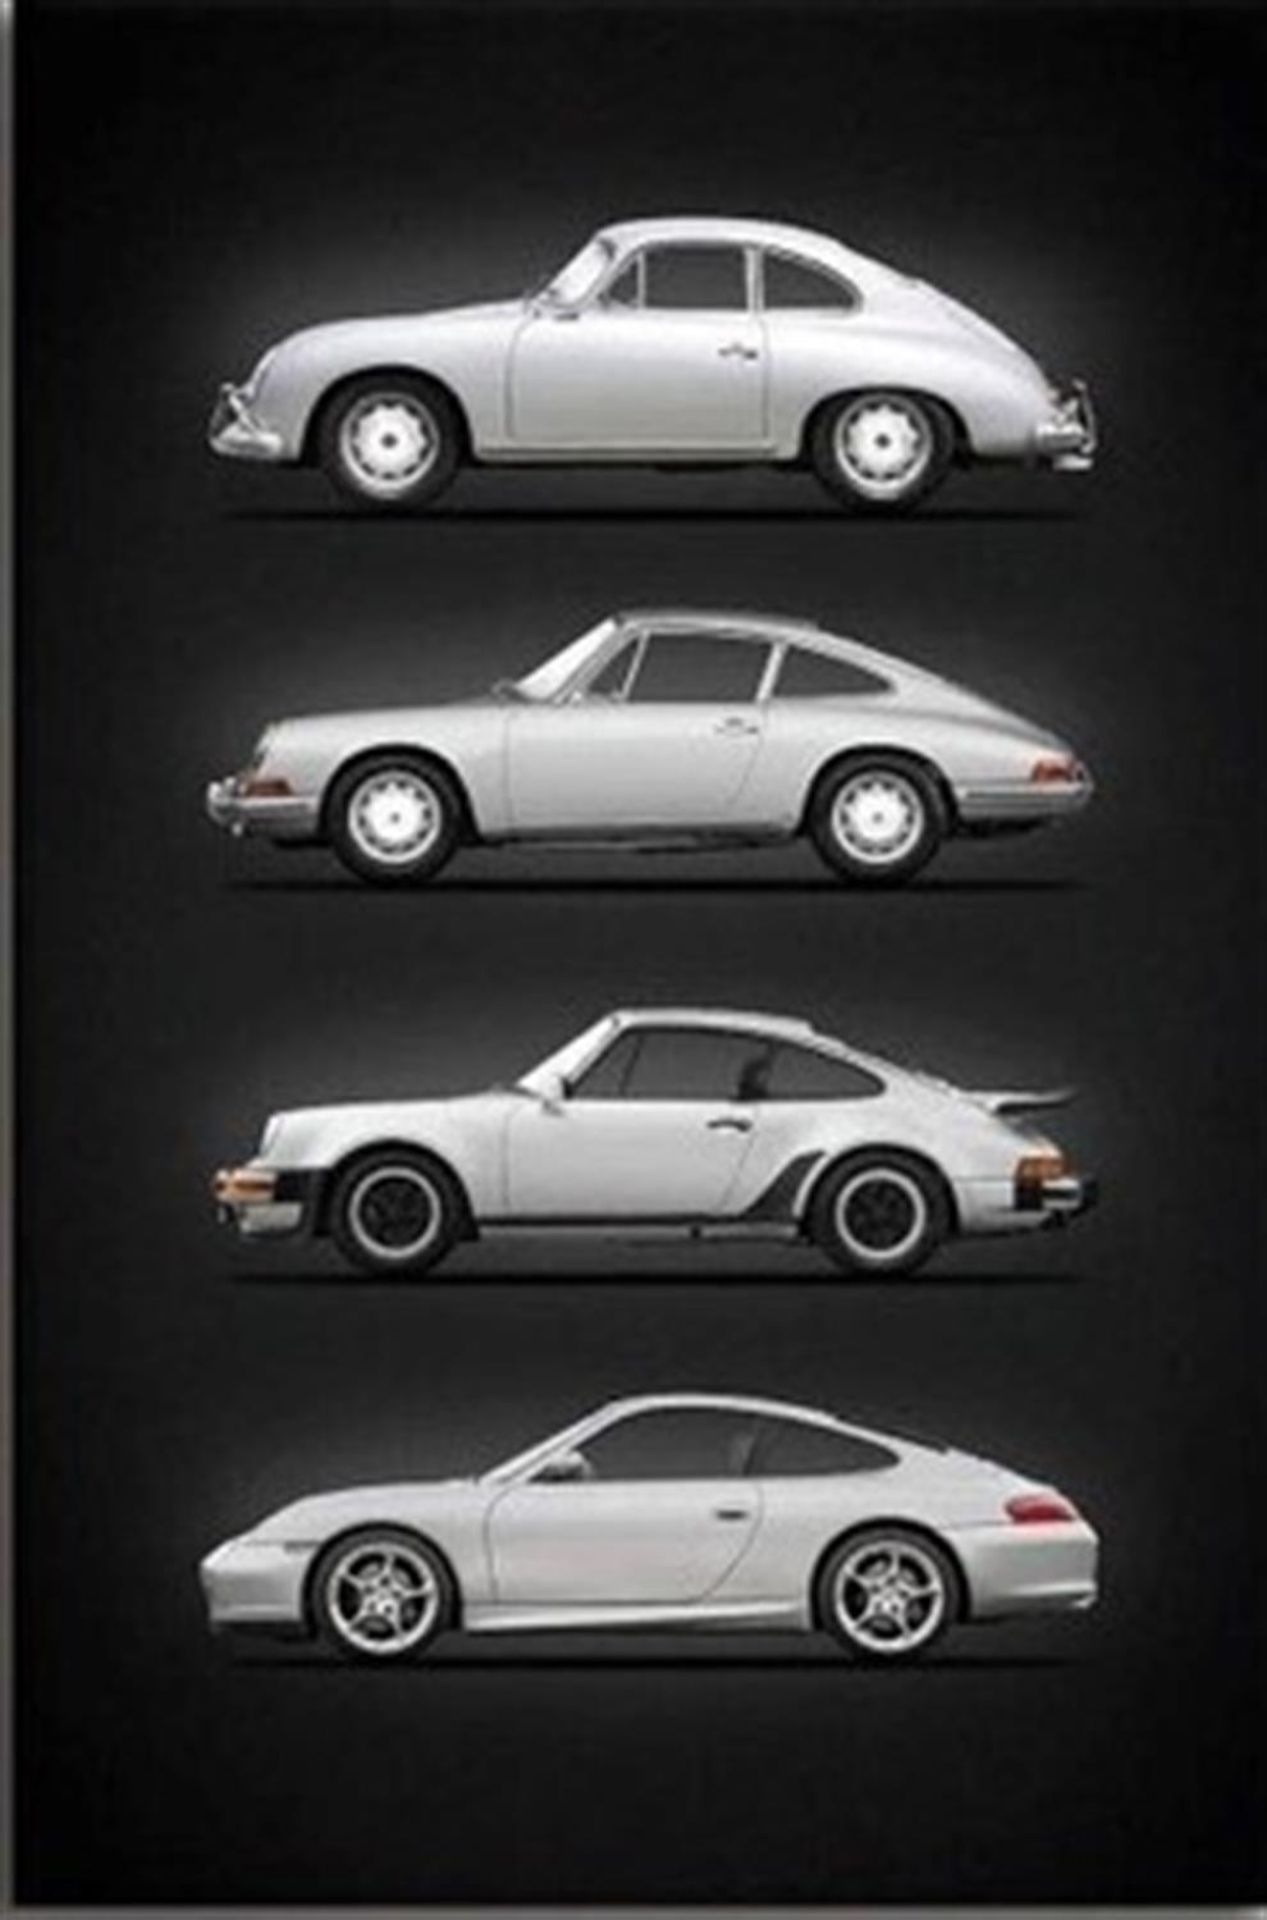 A Large and Impressive 'Evolution of the Porsche 911' Stretch Canvas - Image 2 of 4